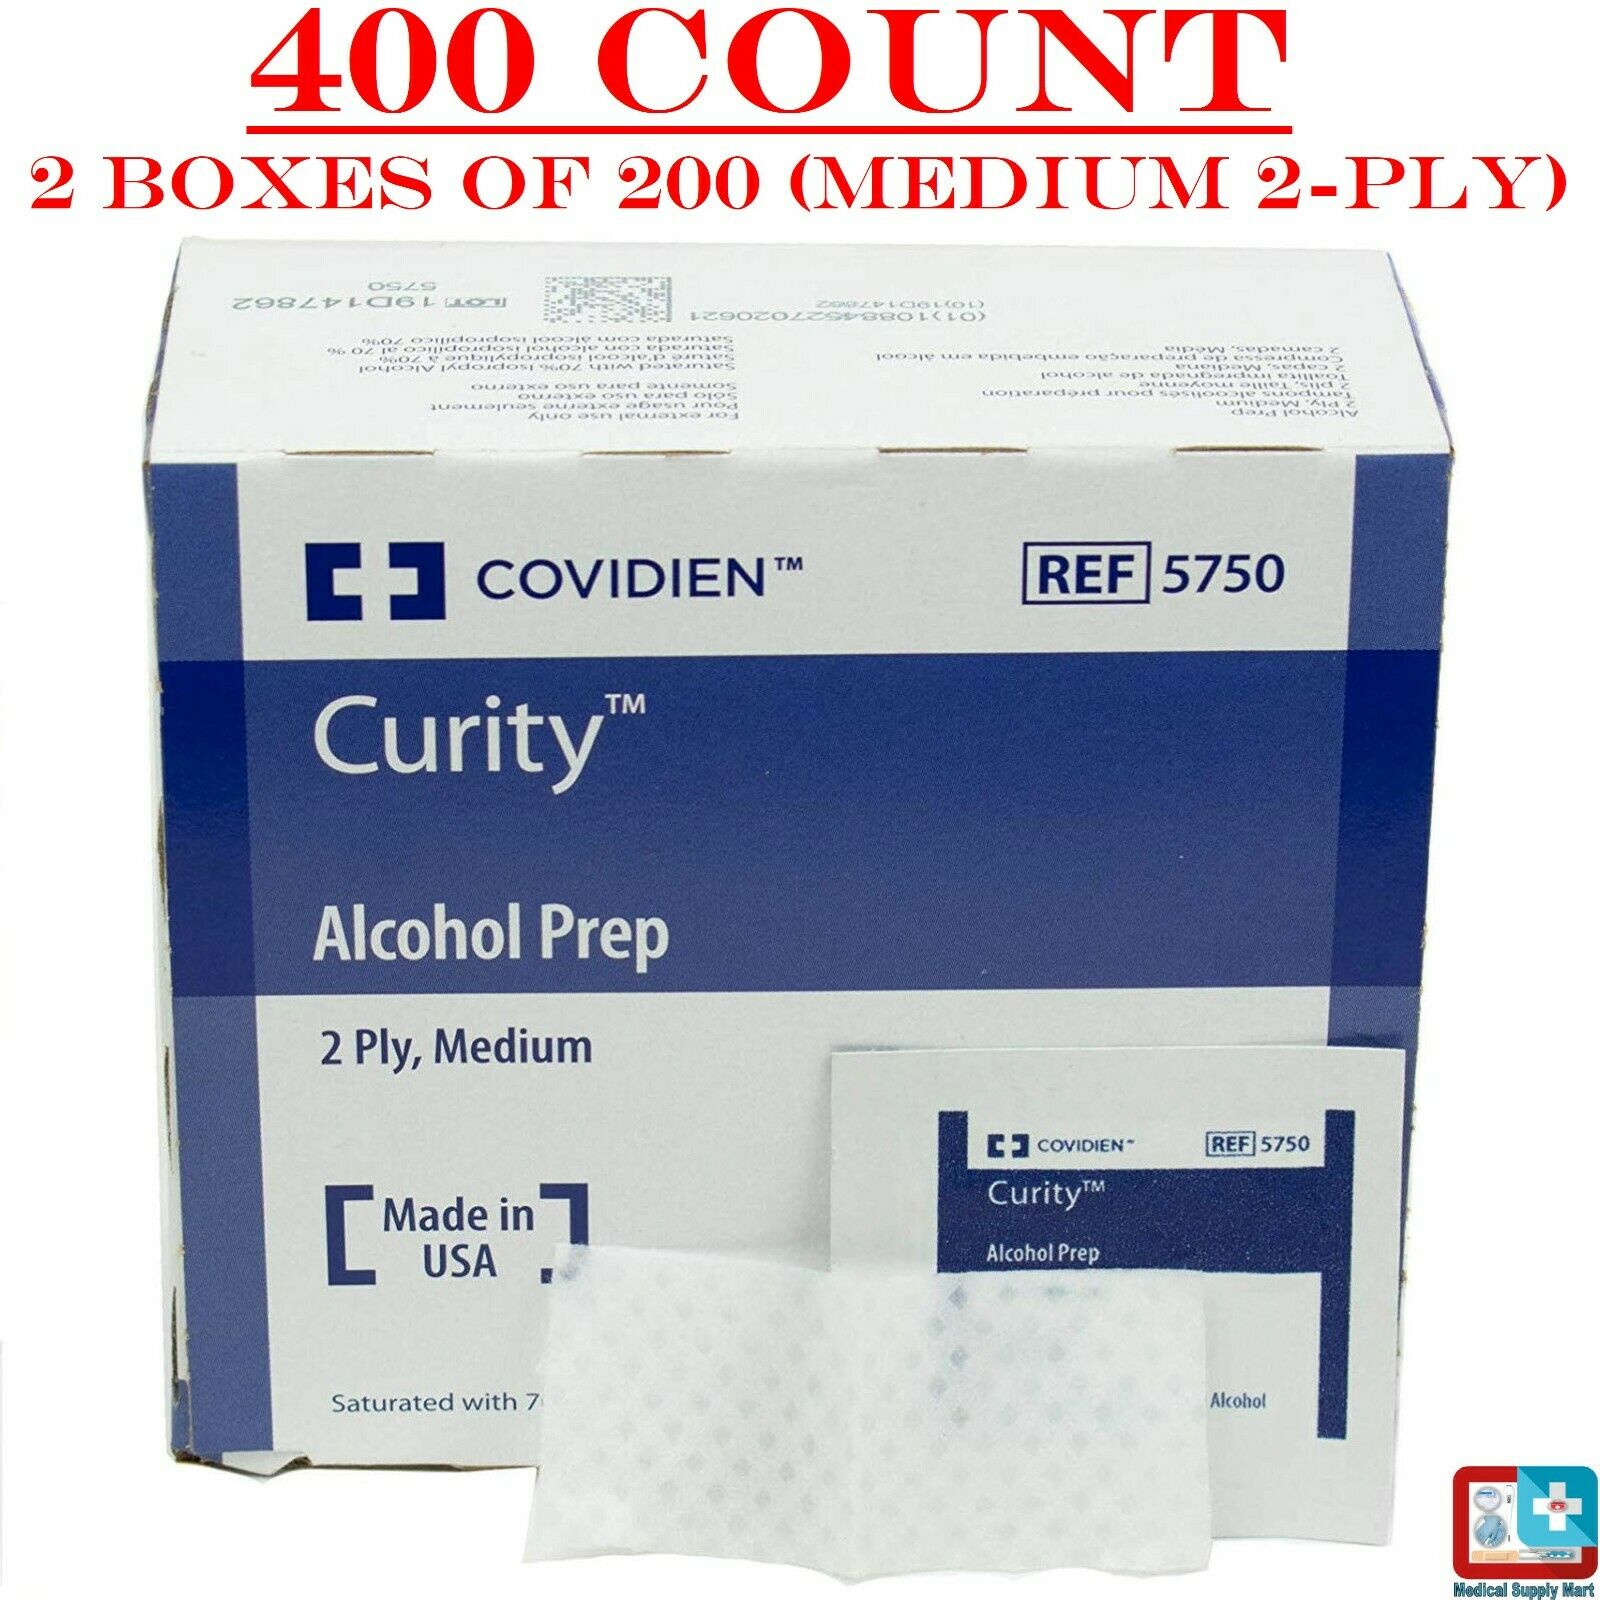 400 Count Sterile Alcohol Prep Pads- Medium 2-ply Size- Curity Covidien 5750